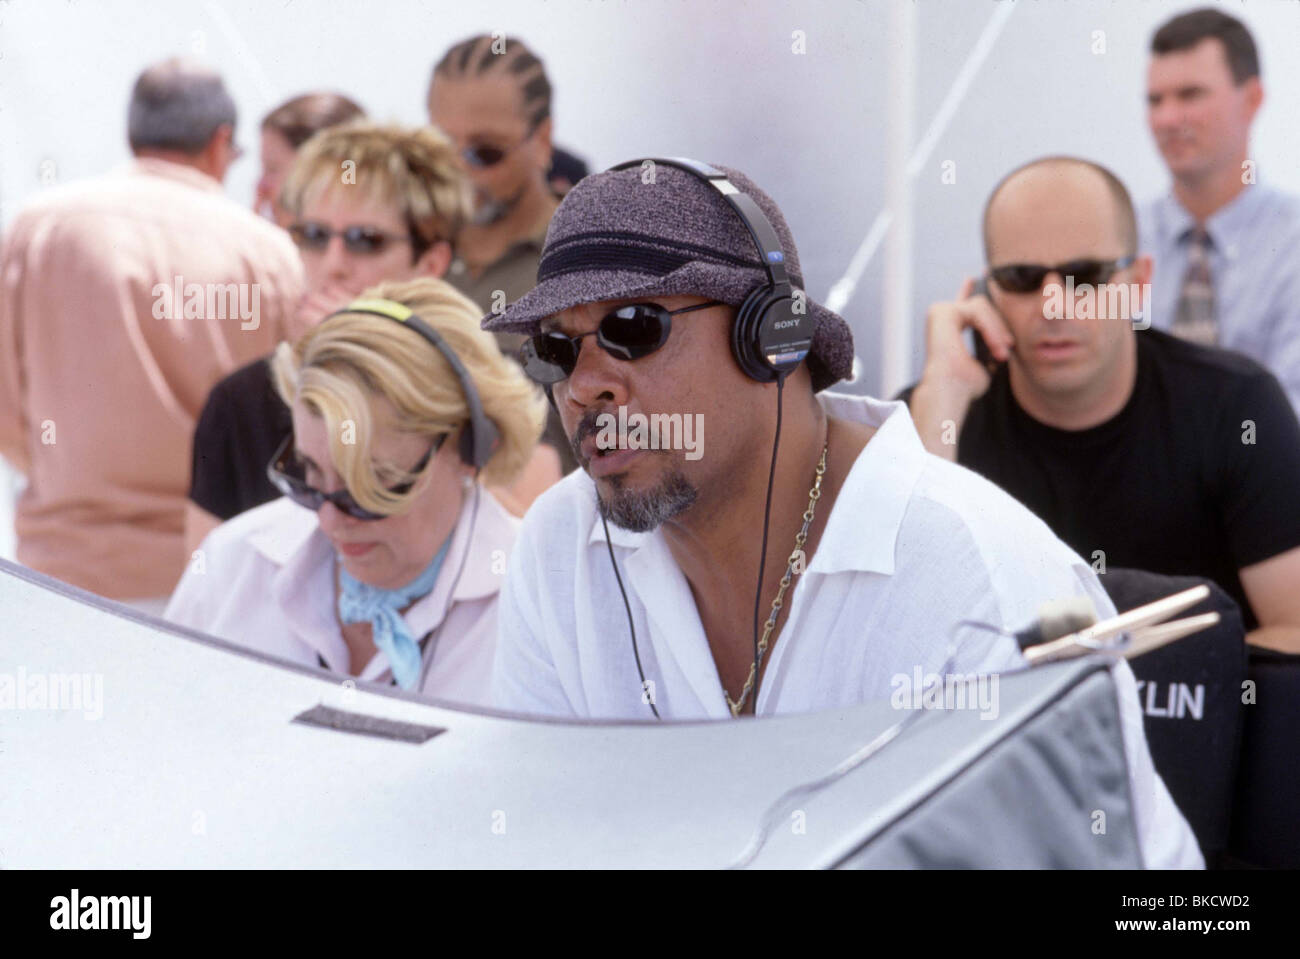 Carl Franklin Out Time 03 High Resolution Stock Photography And Images Alamy